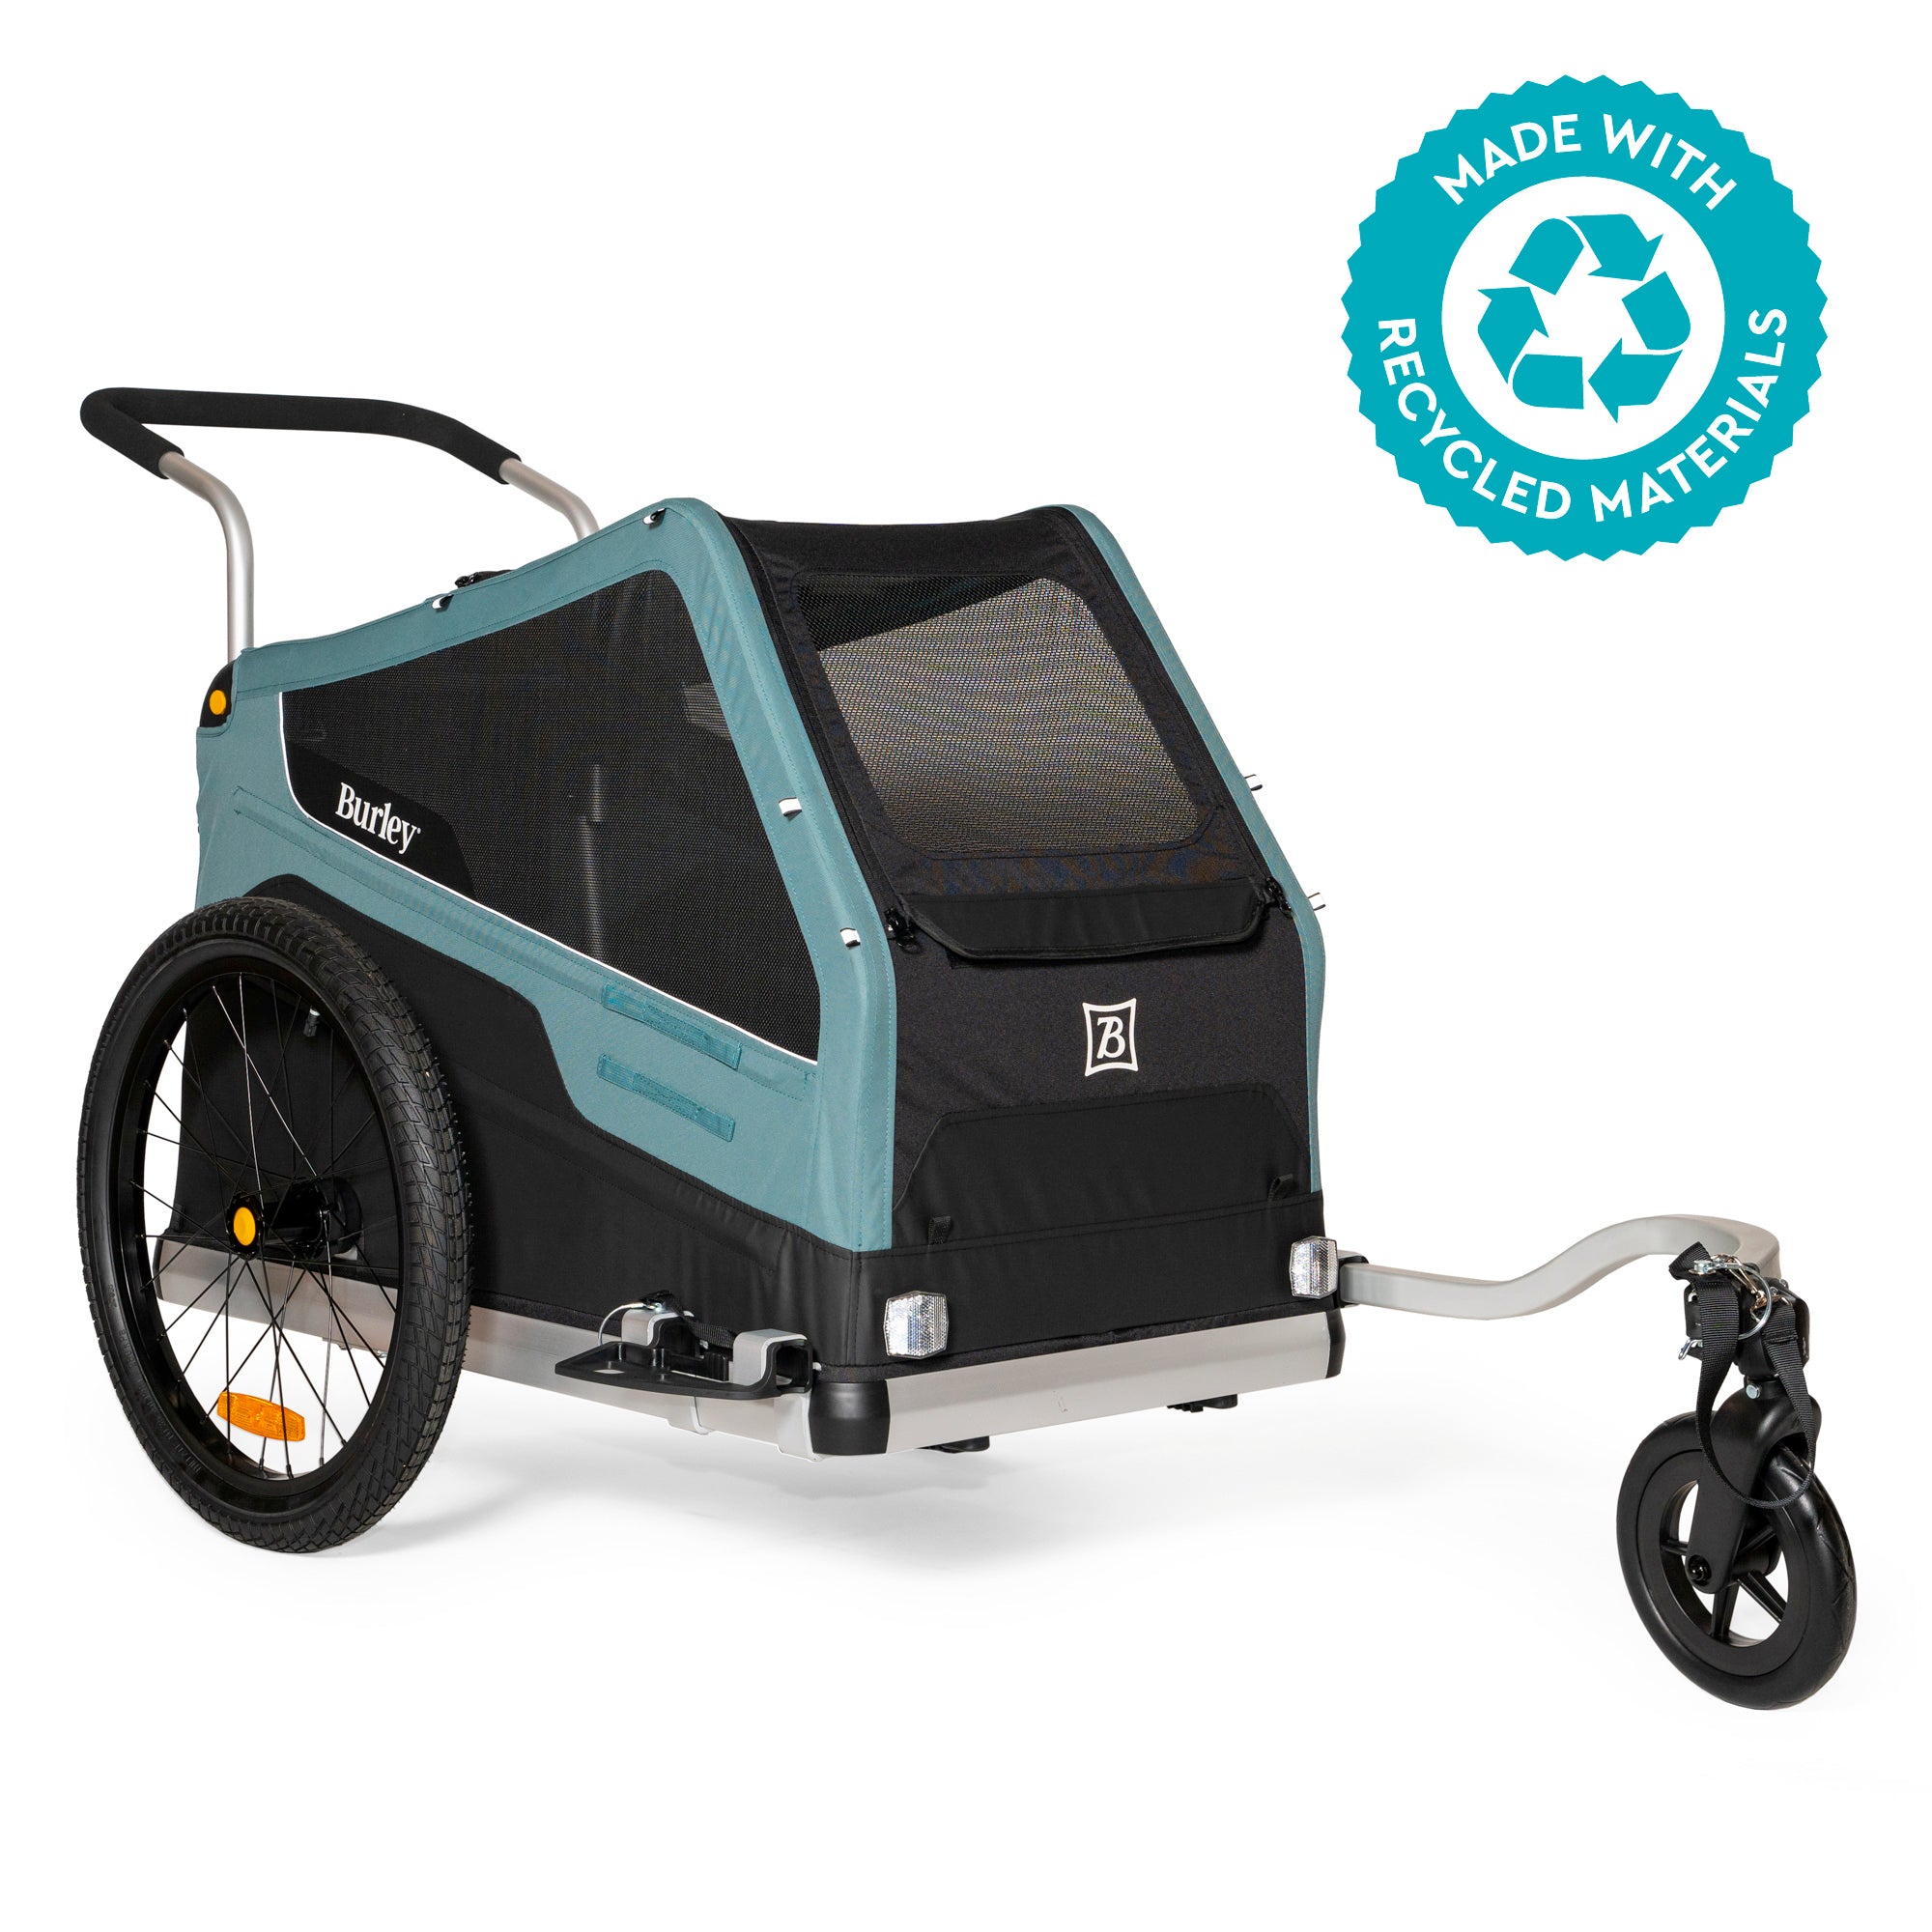 bike trailer for dogs, bike trailer for dogs Suppliers and Manufacturers at